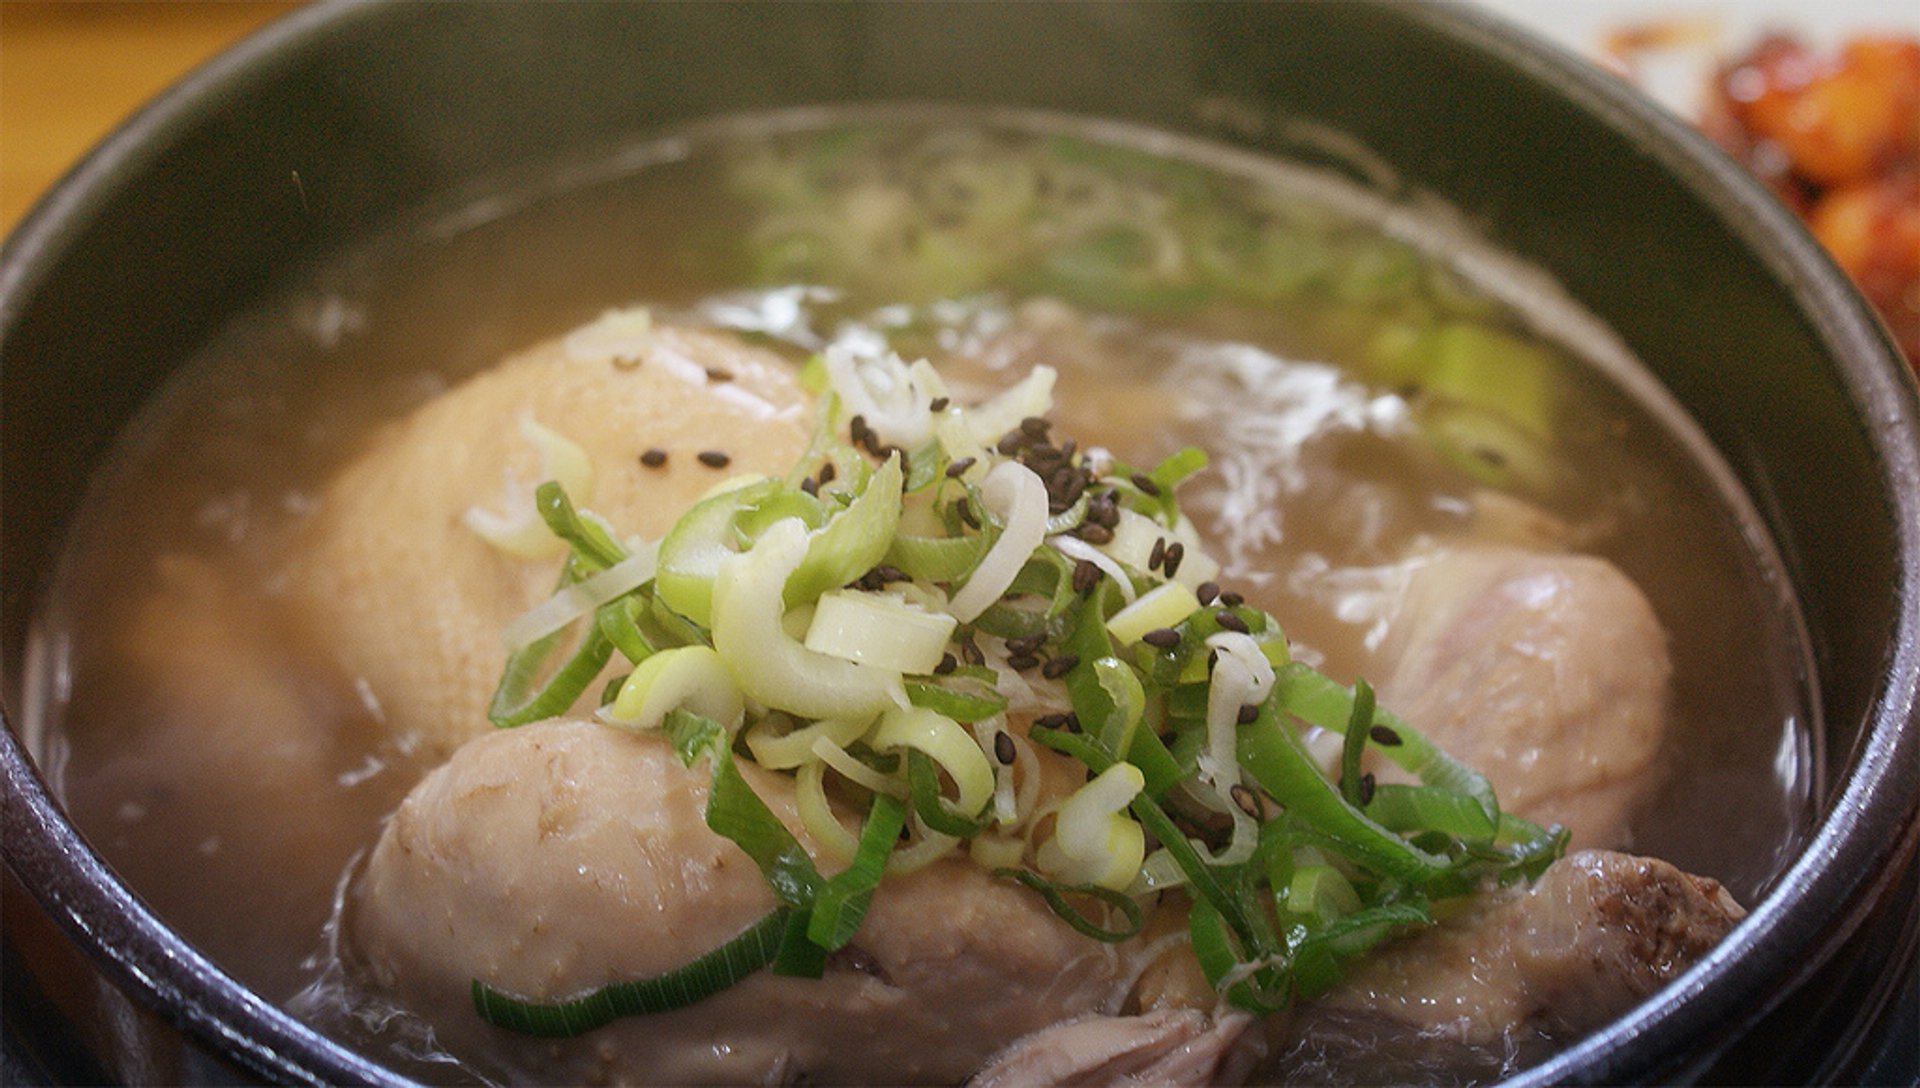 Eat Samgyetang on the Hottest Day